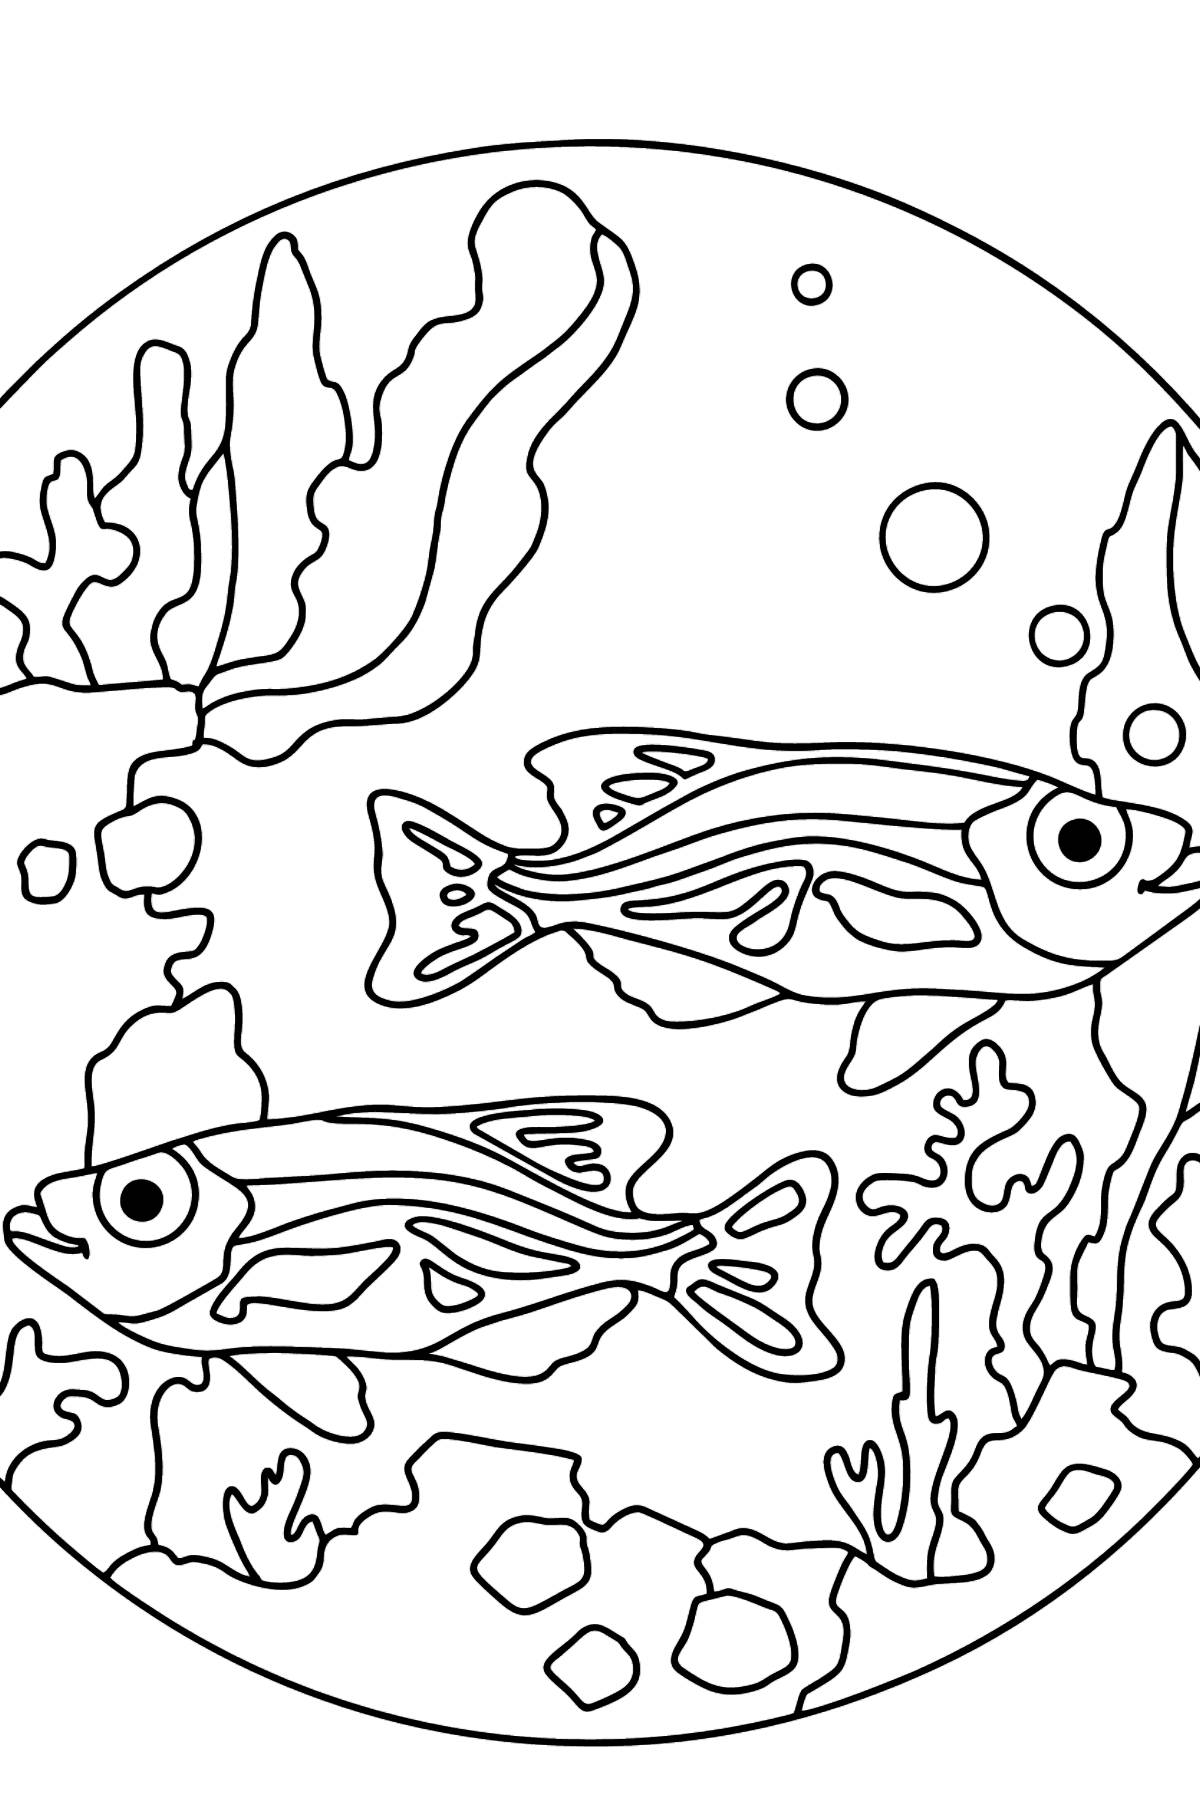 Coloring page shiny fish in the aquarium